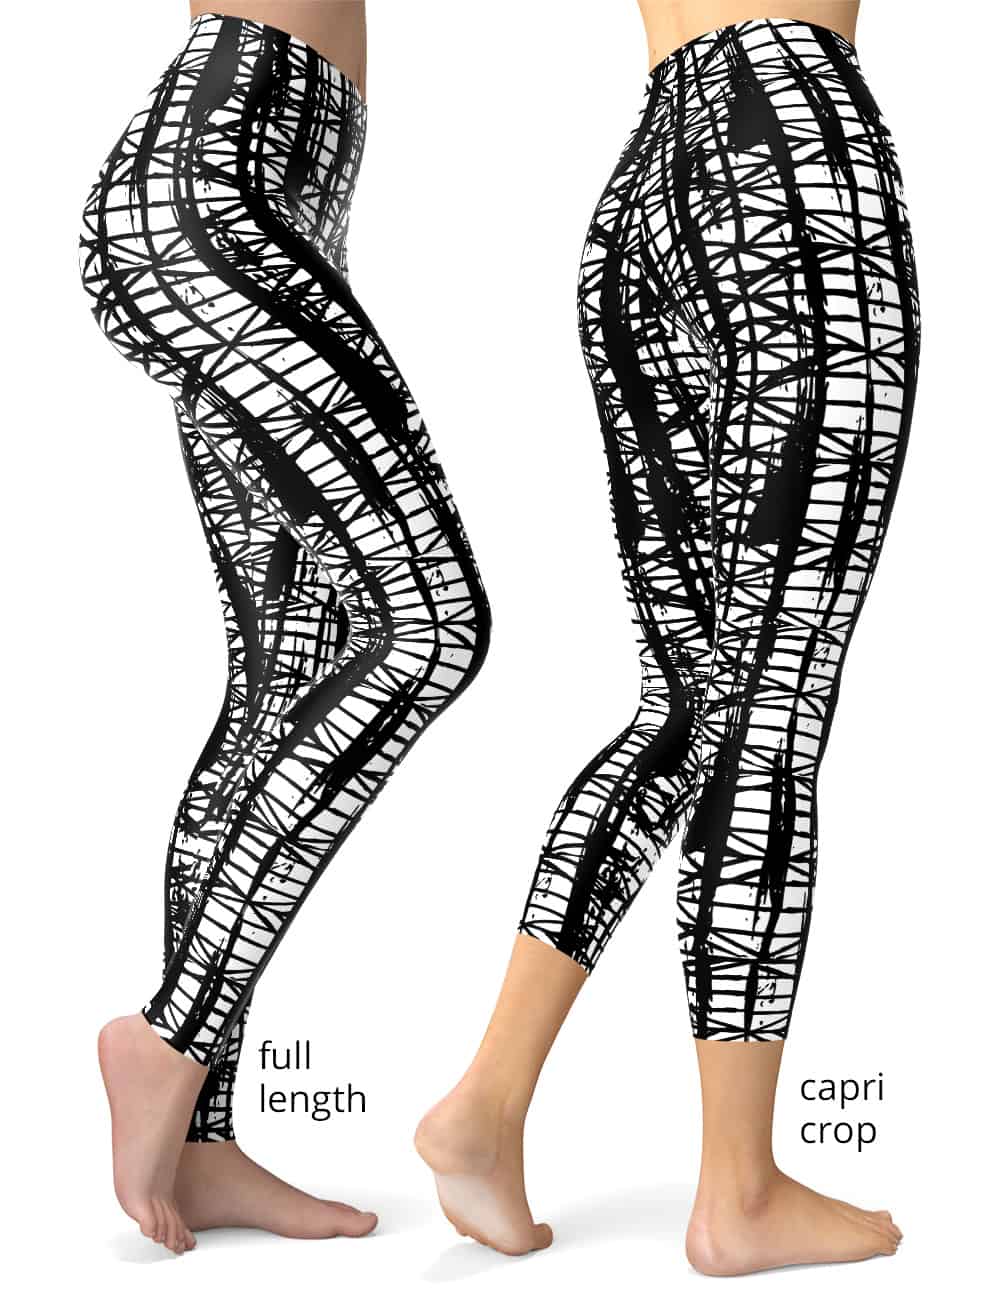 Tubes in 3D One Piece Swimsuit - Sporty Chimp legging, workout gear & more